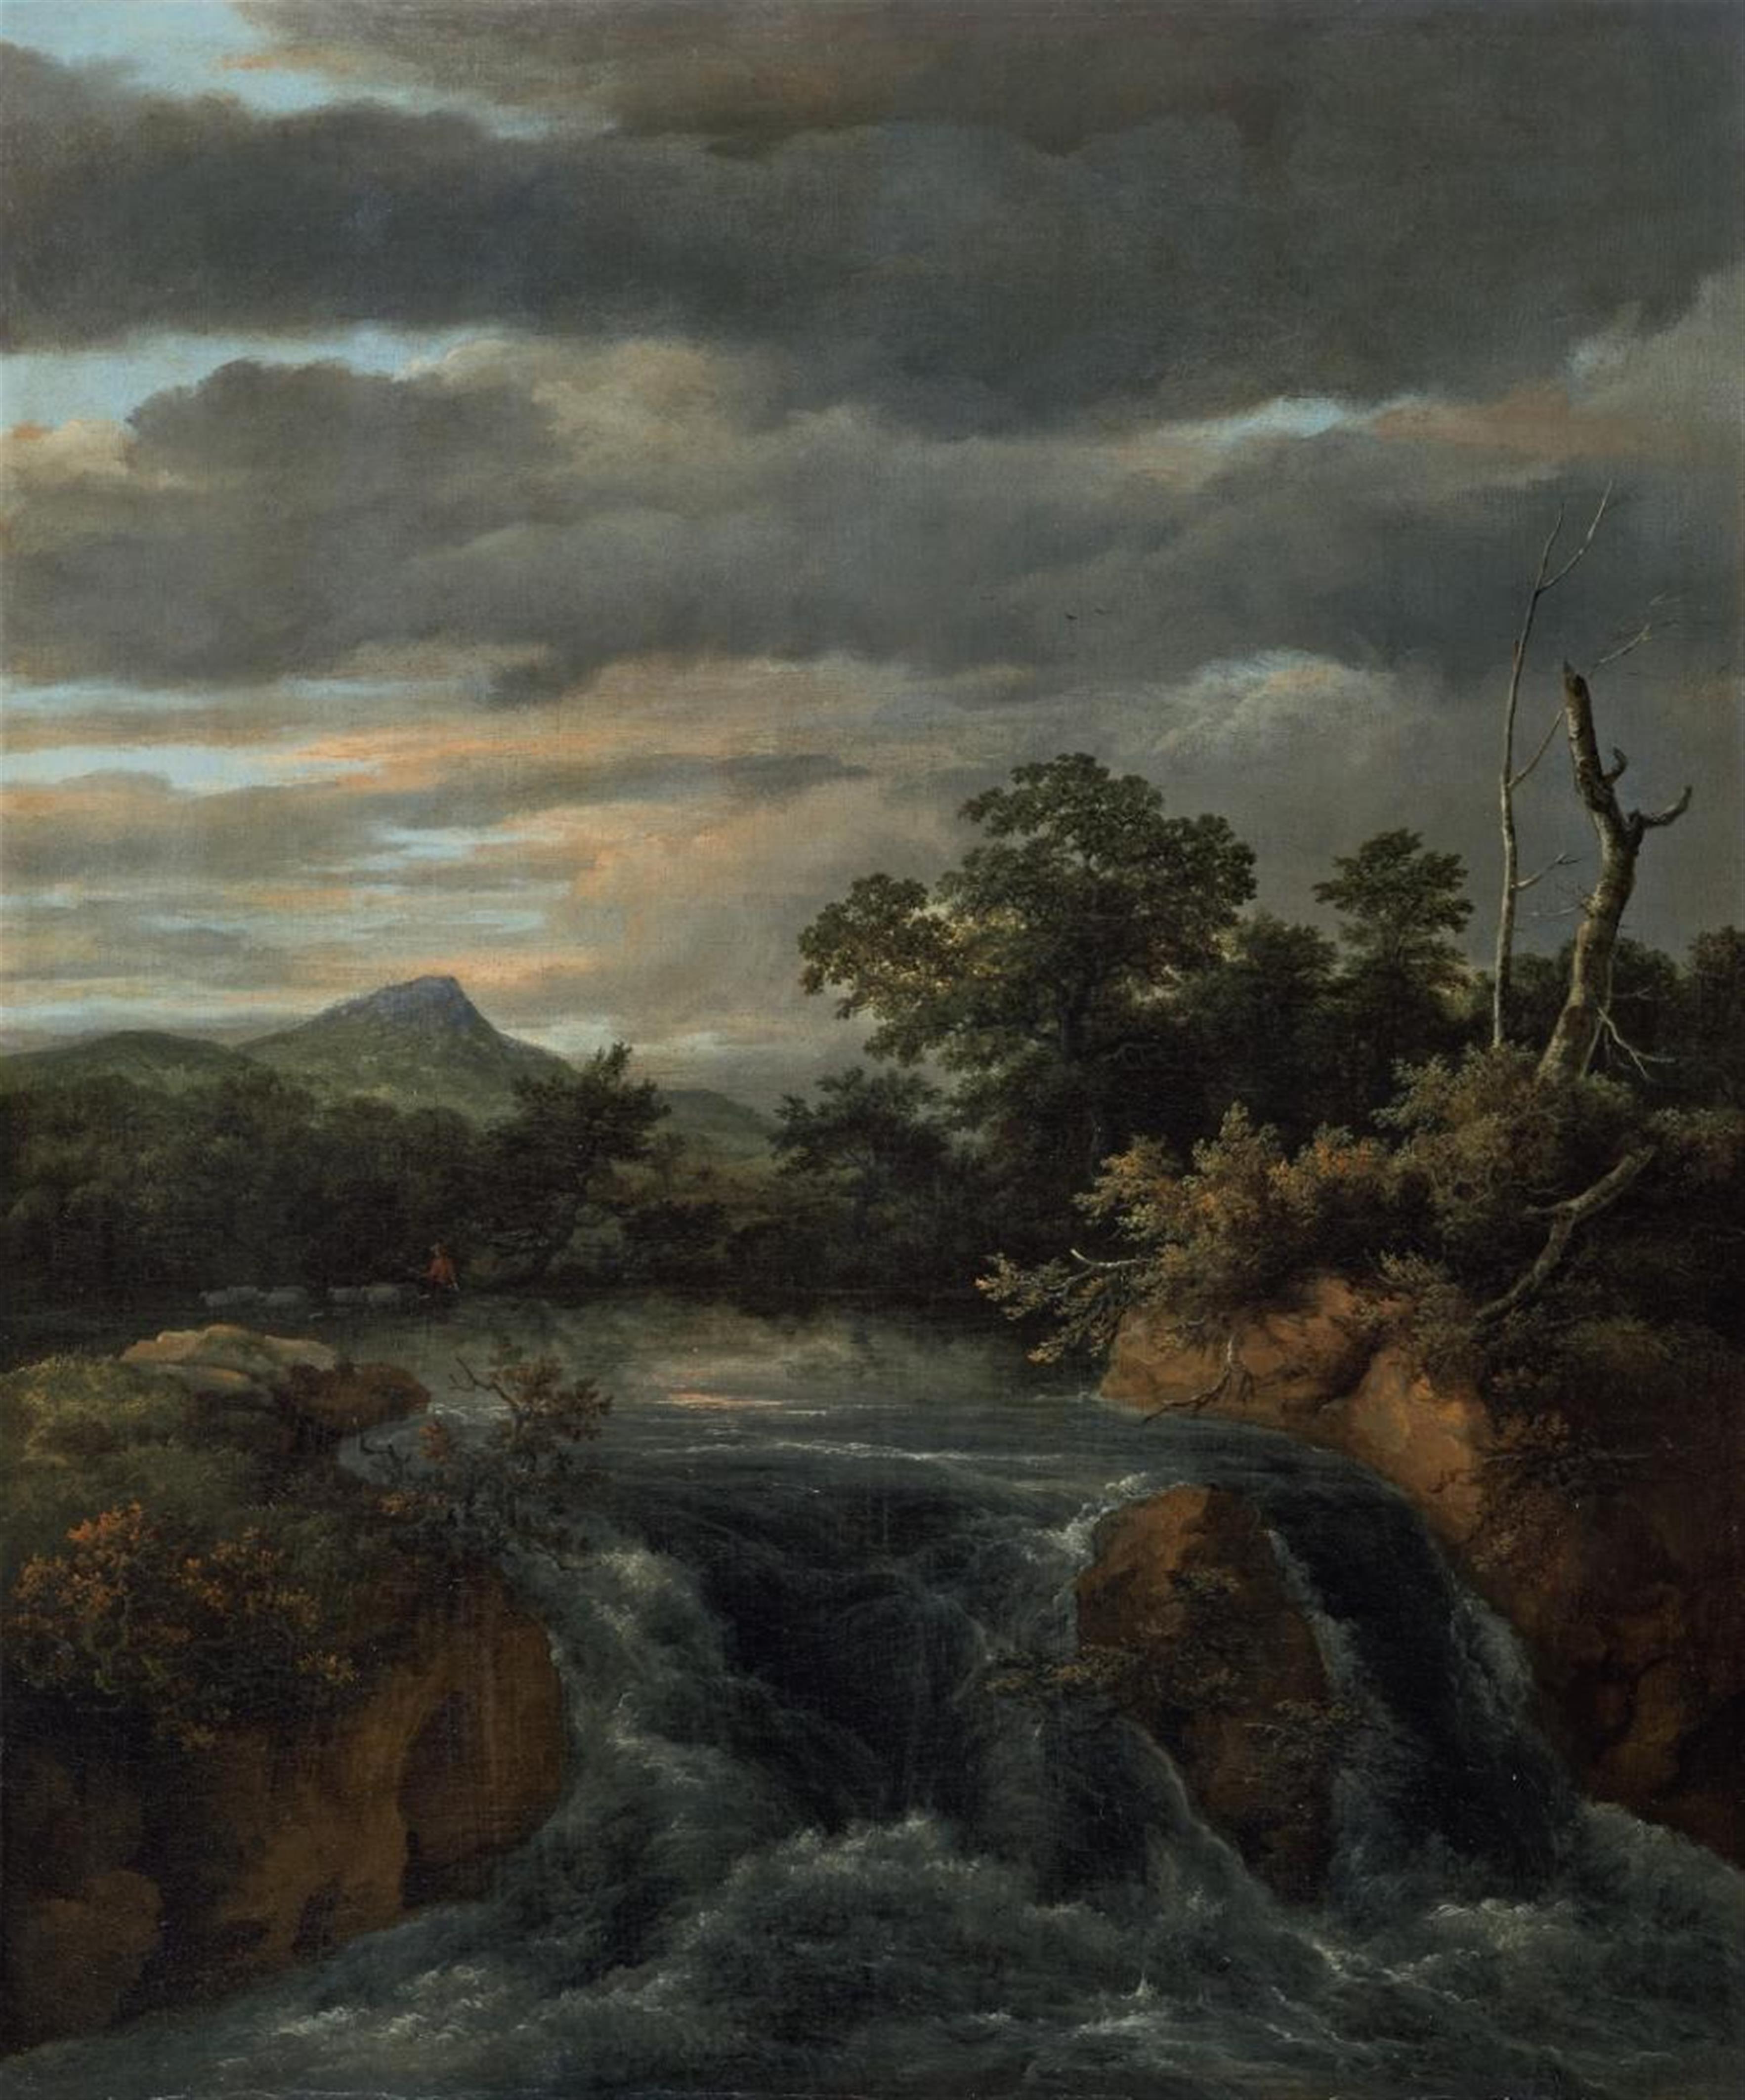 Jacob van Ruisdael - WOODED LANDSCAPE WITH A WATERFALL - image-1